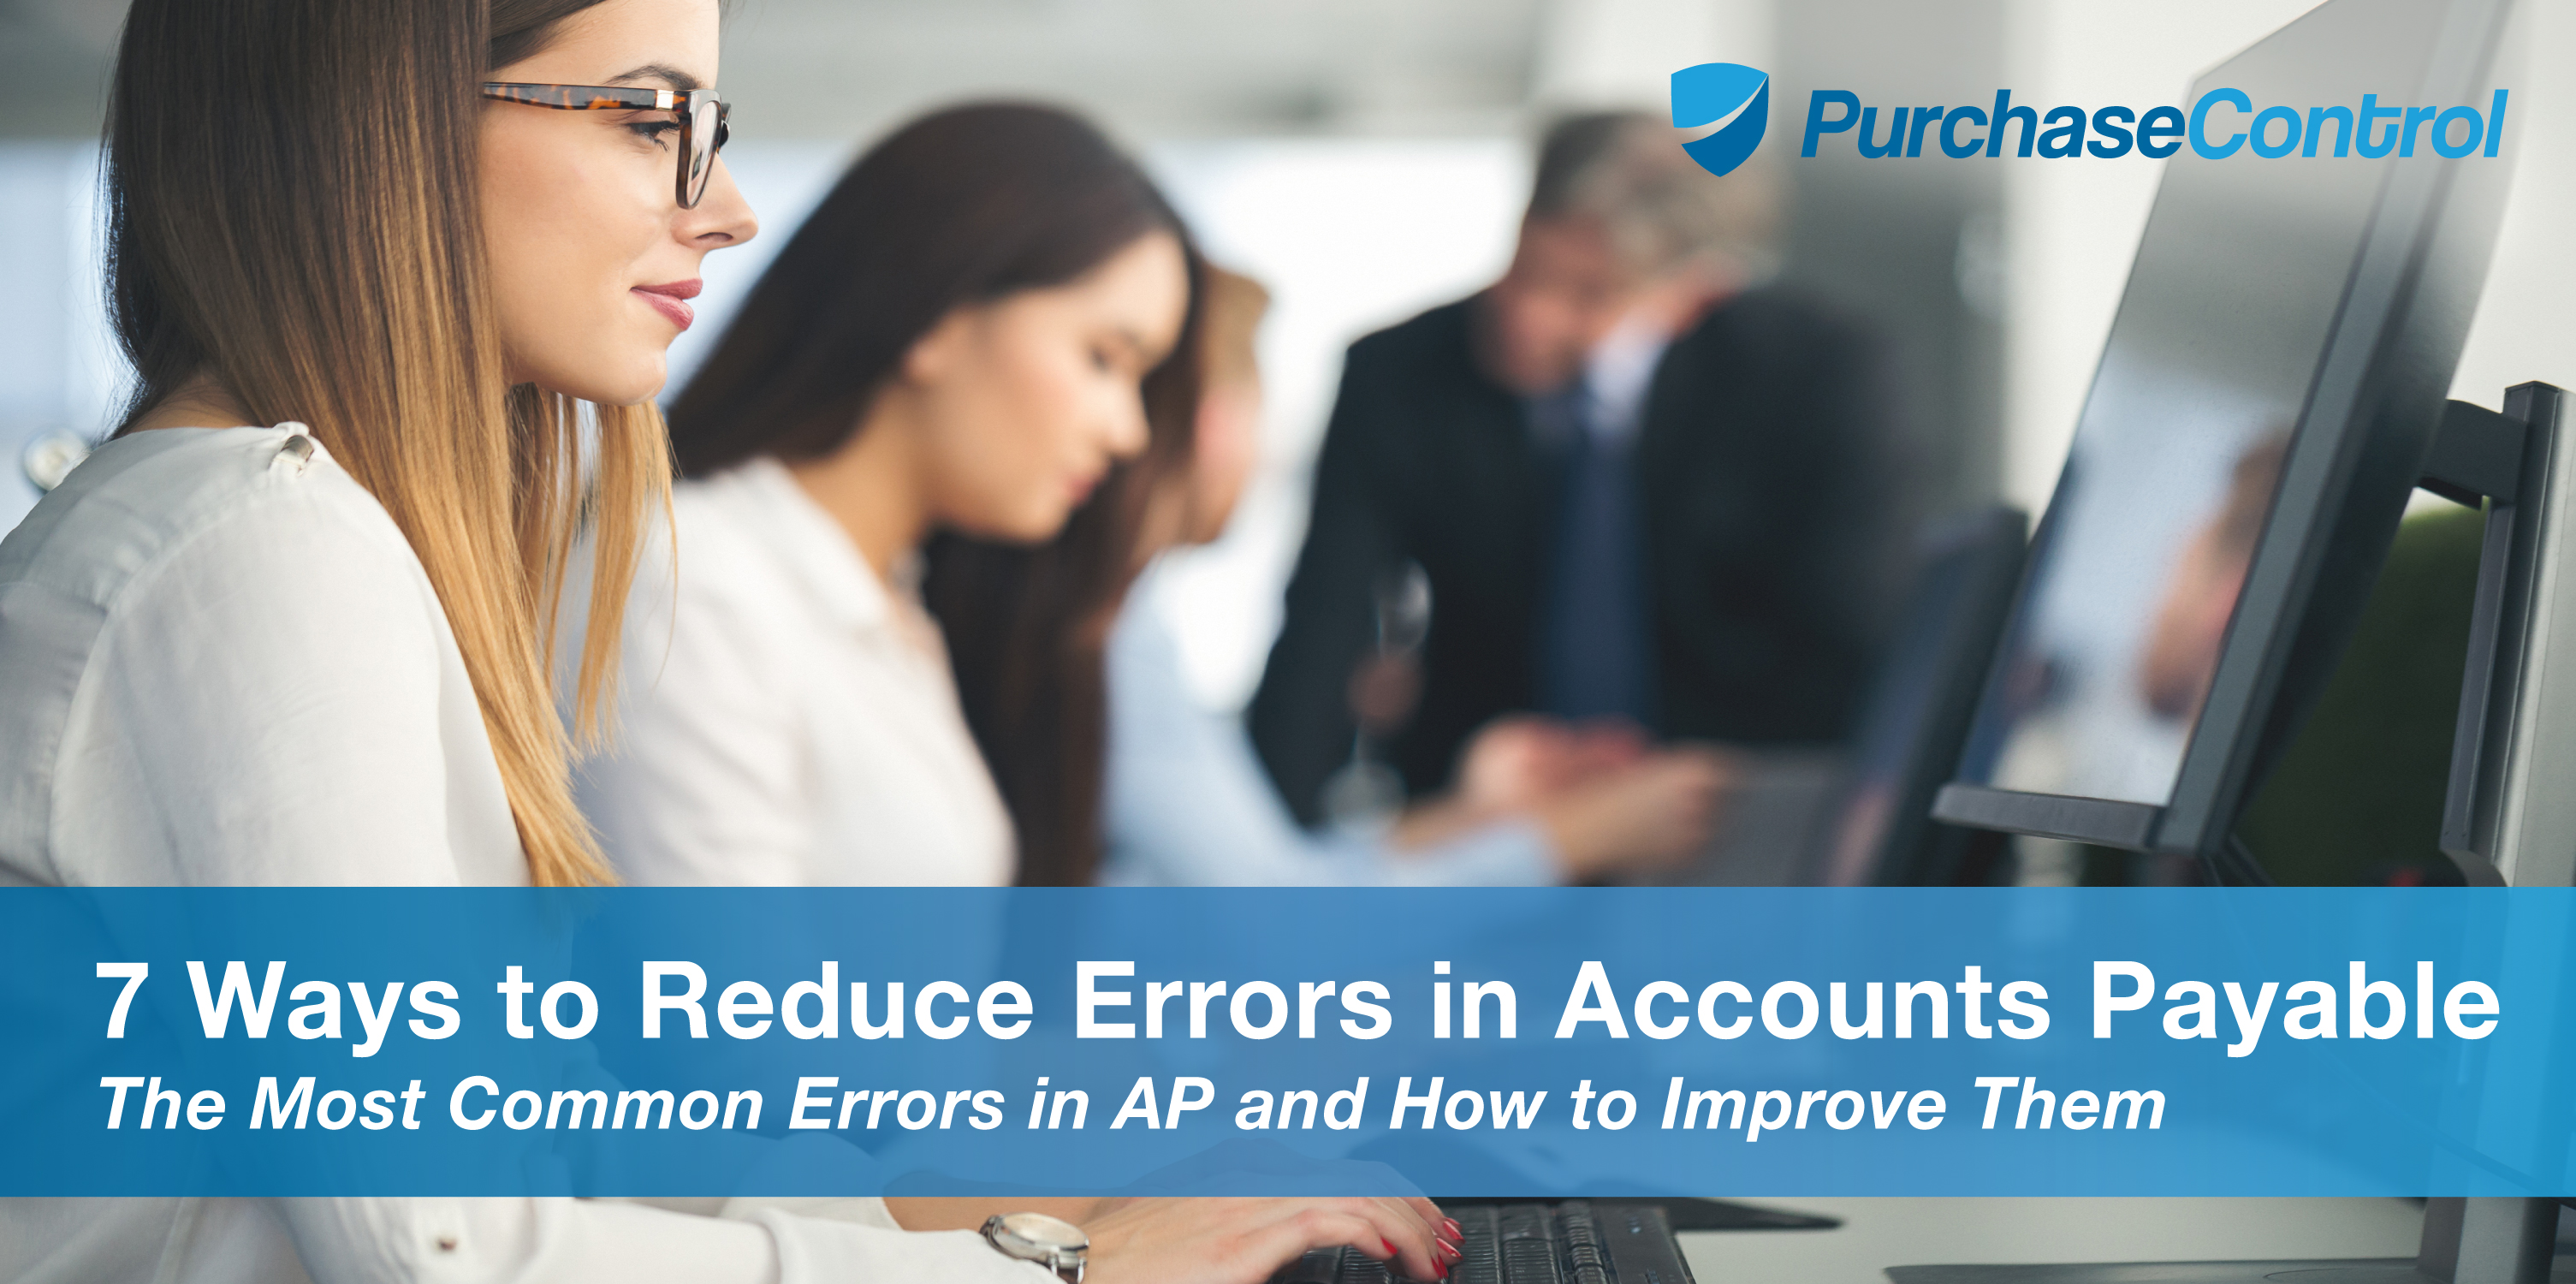 7 Ways to Reduce Errors in Accounts Payable (AP) Blog Cover Text